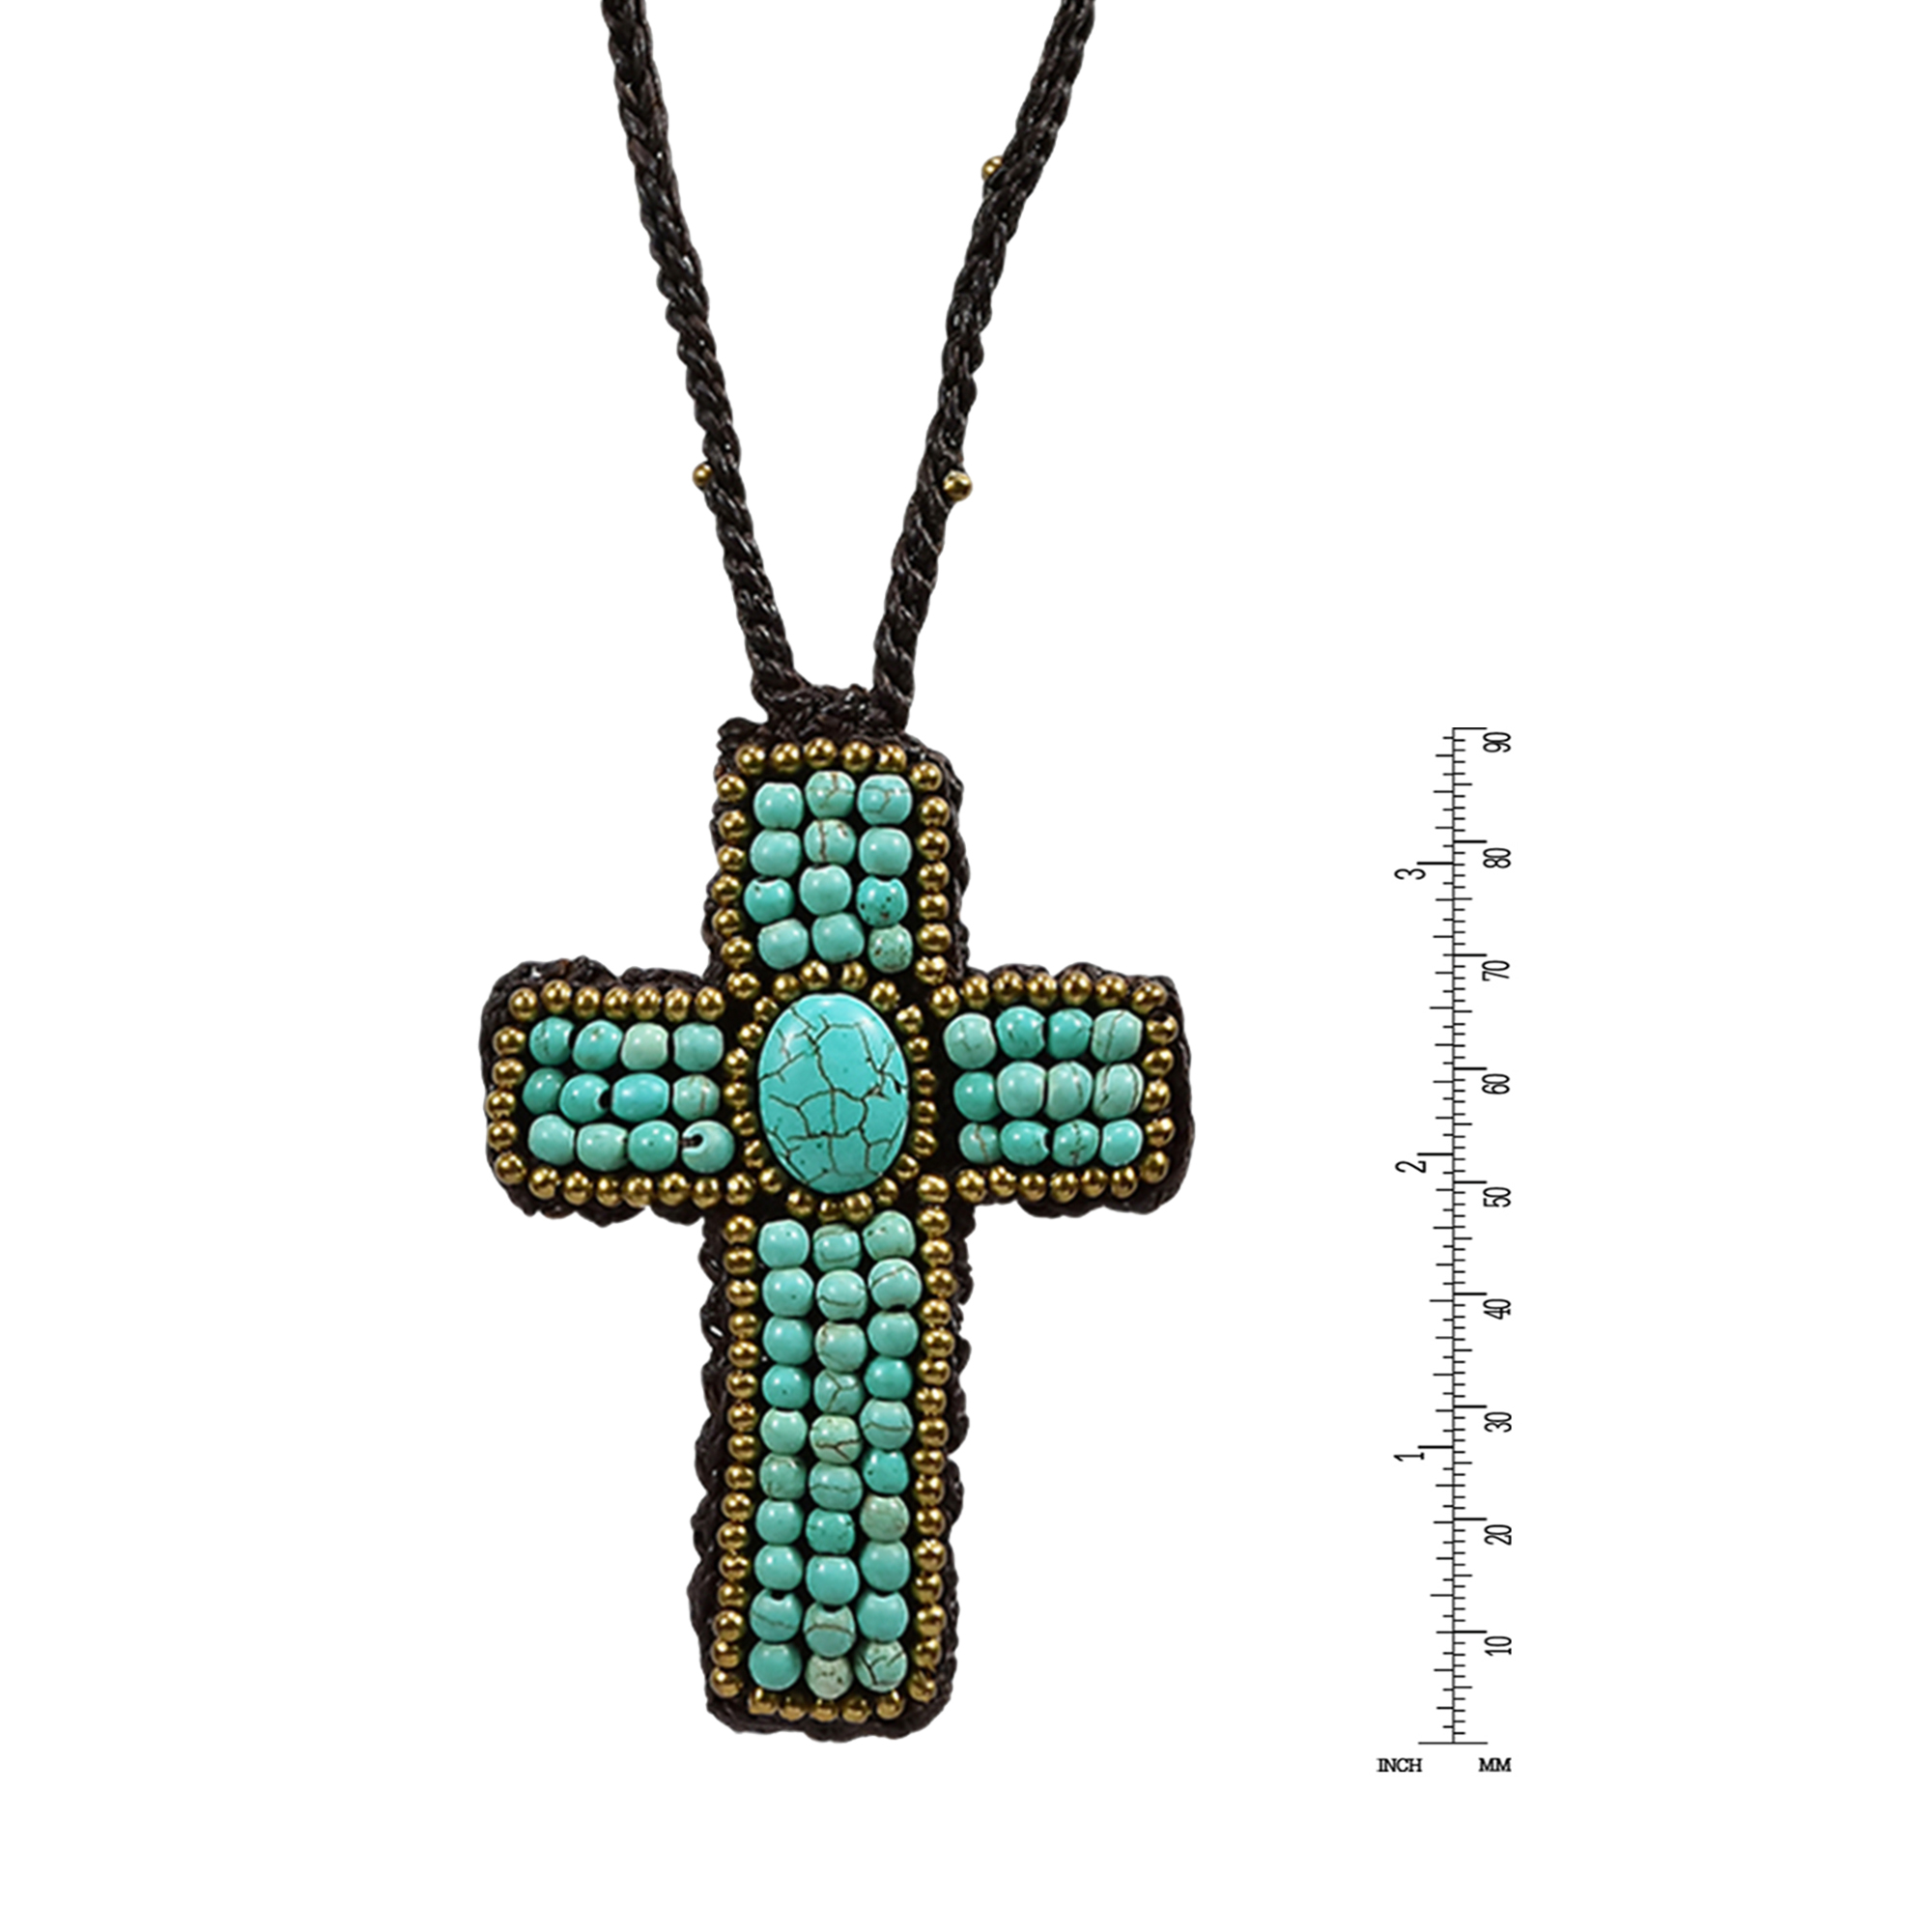 Antique Cross Turquoise Stone Brass Embellished Long Necklace - image 5 of 5